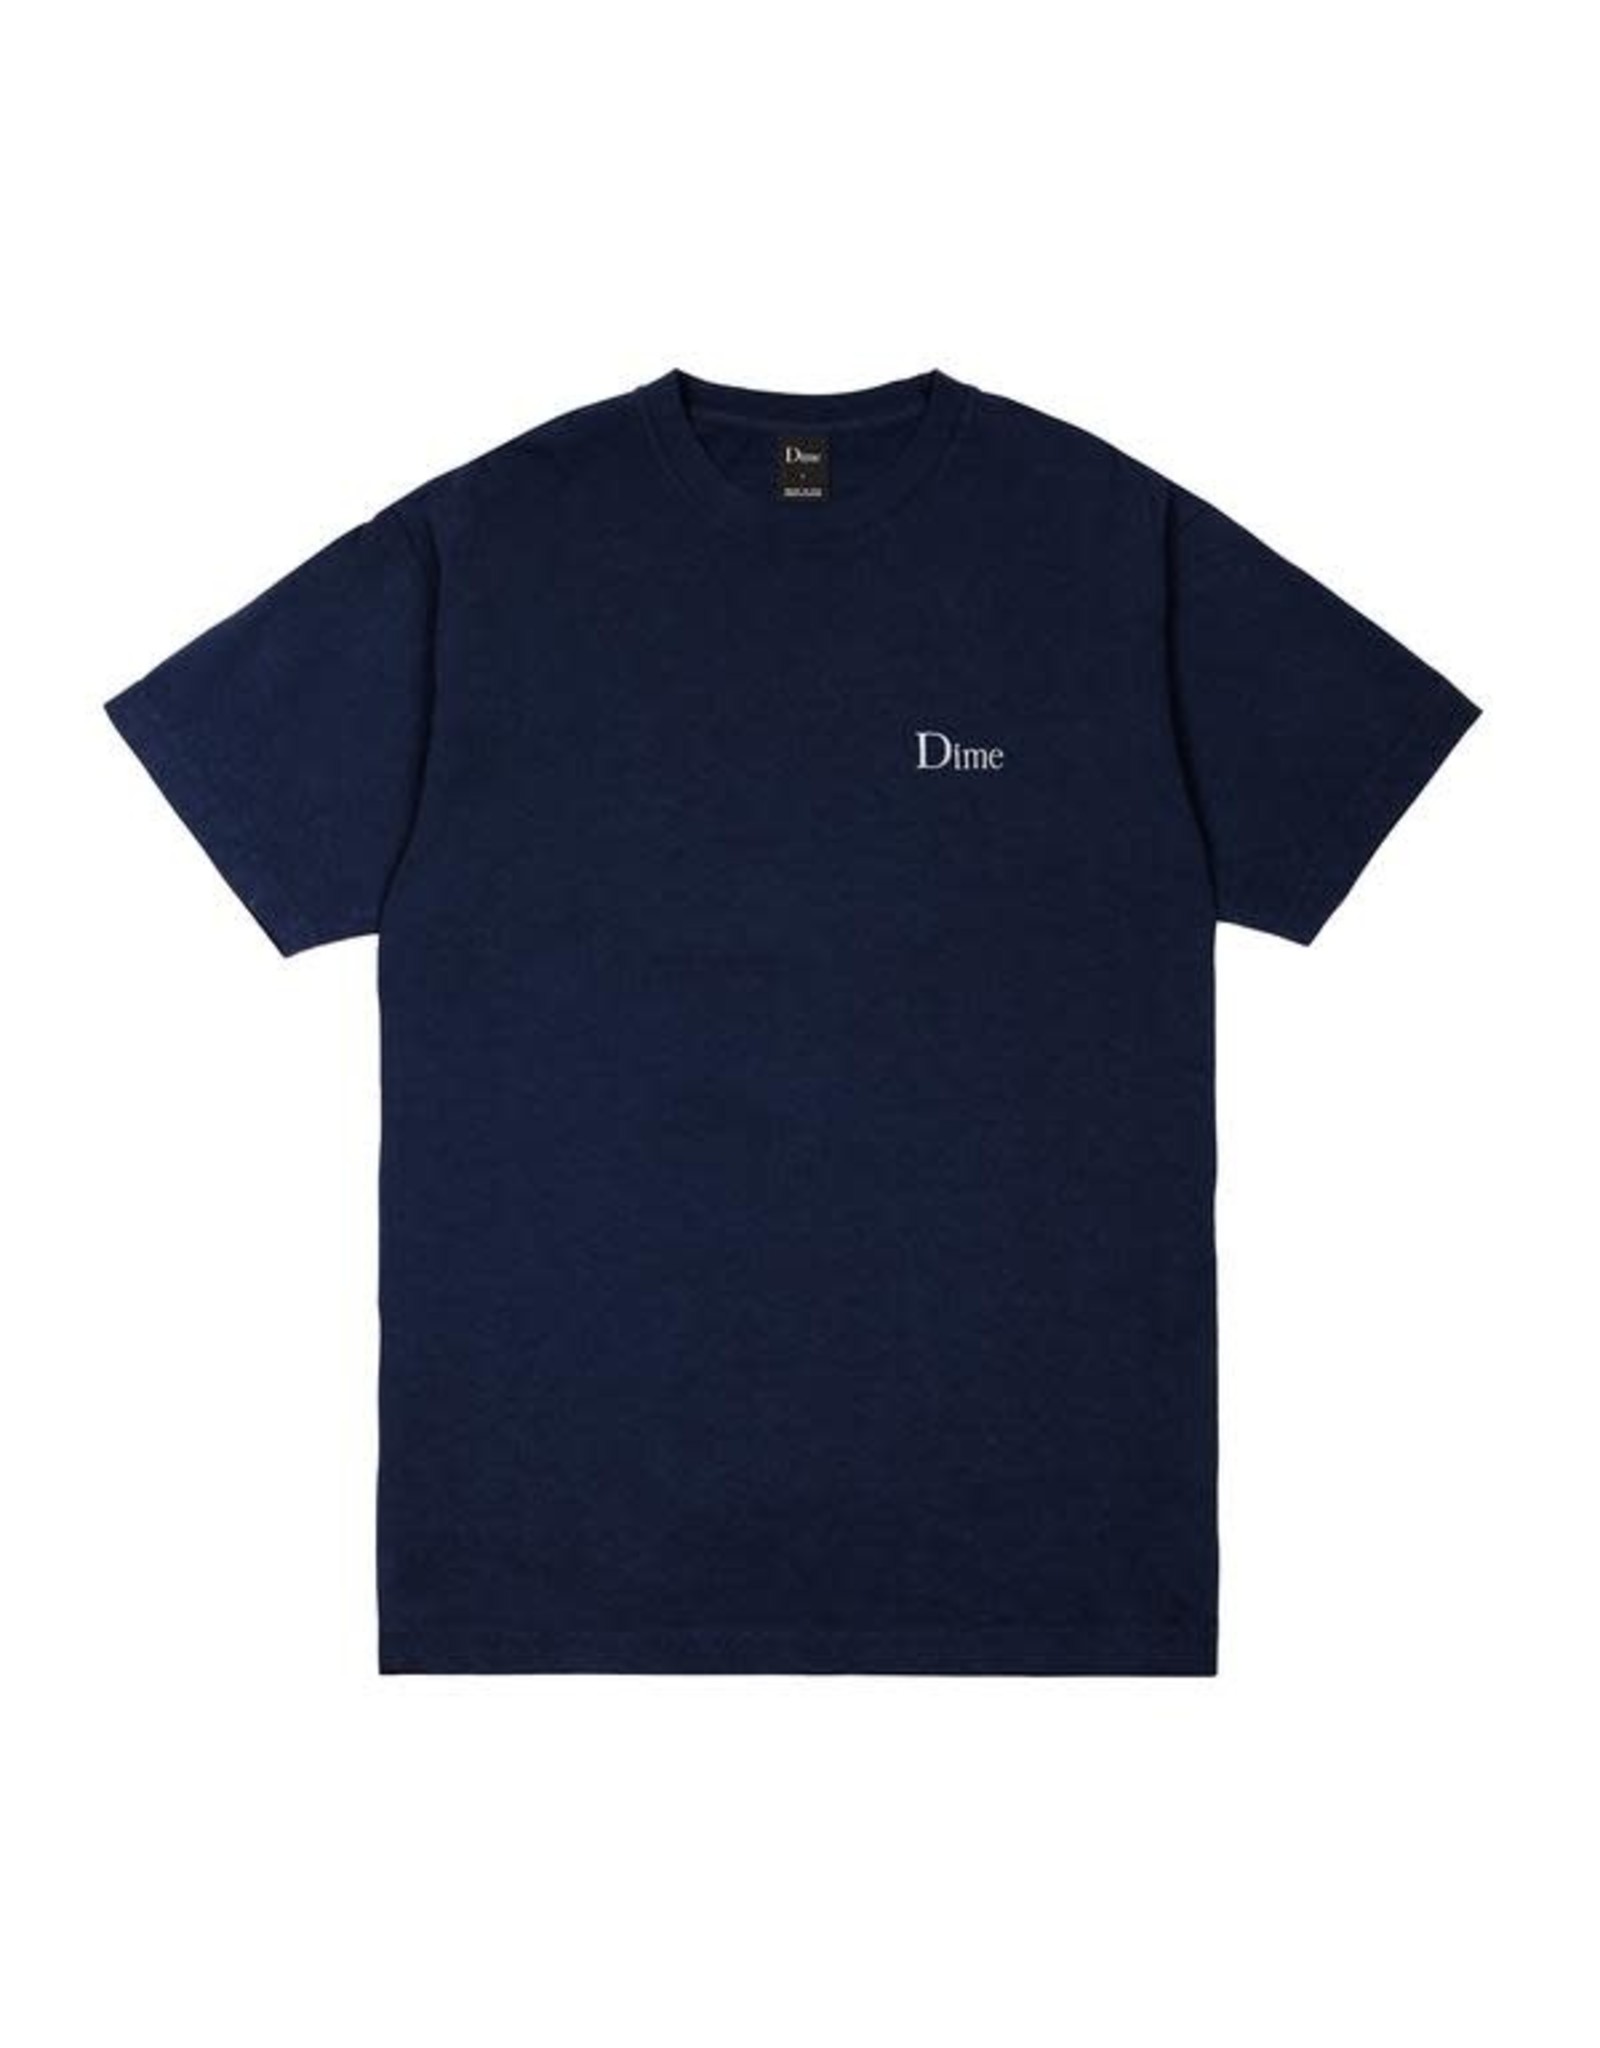 DIME Dime classic logo embroidered t-shirt